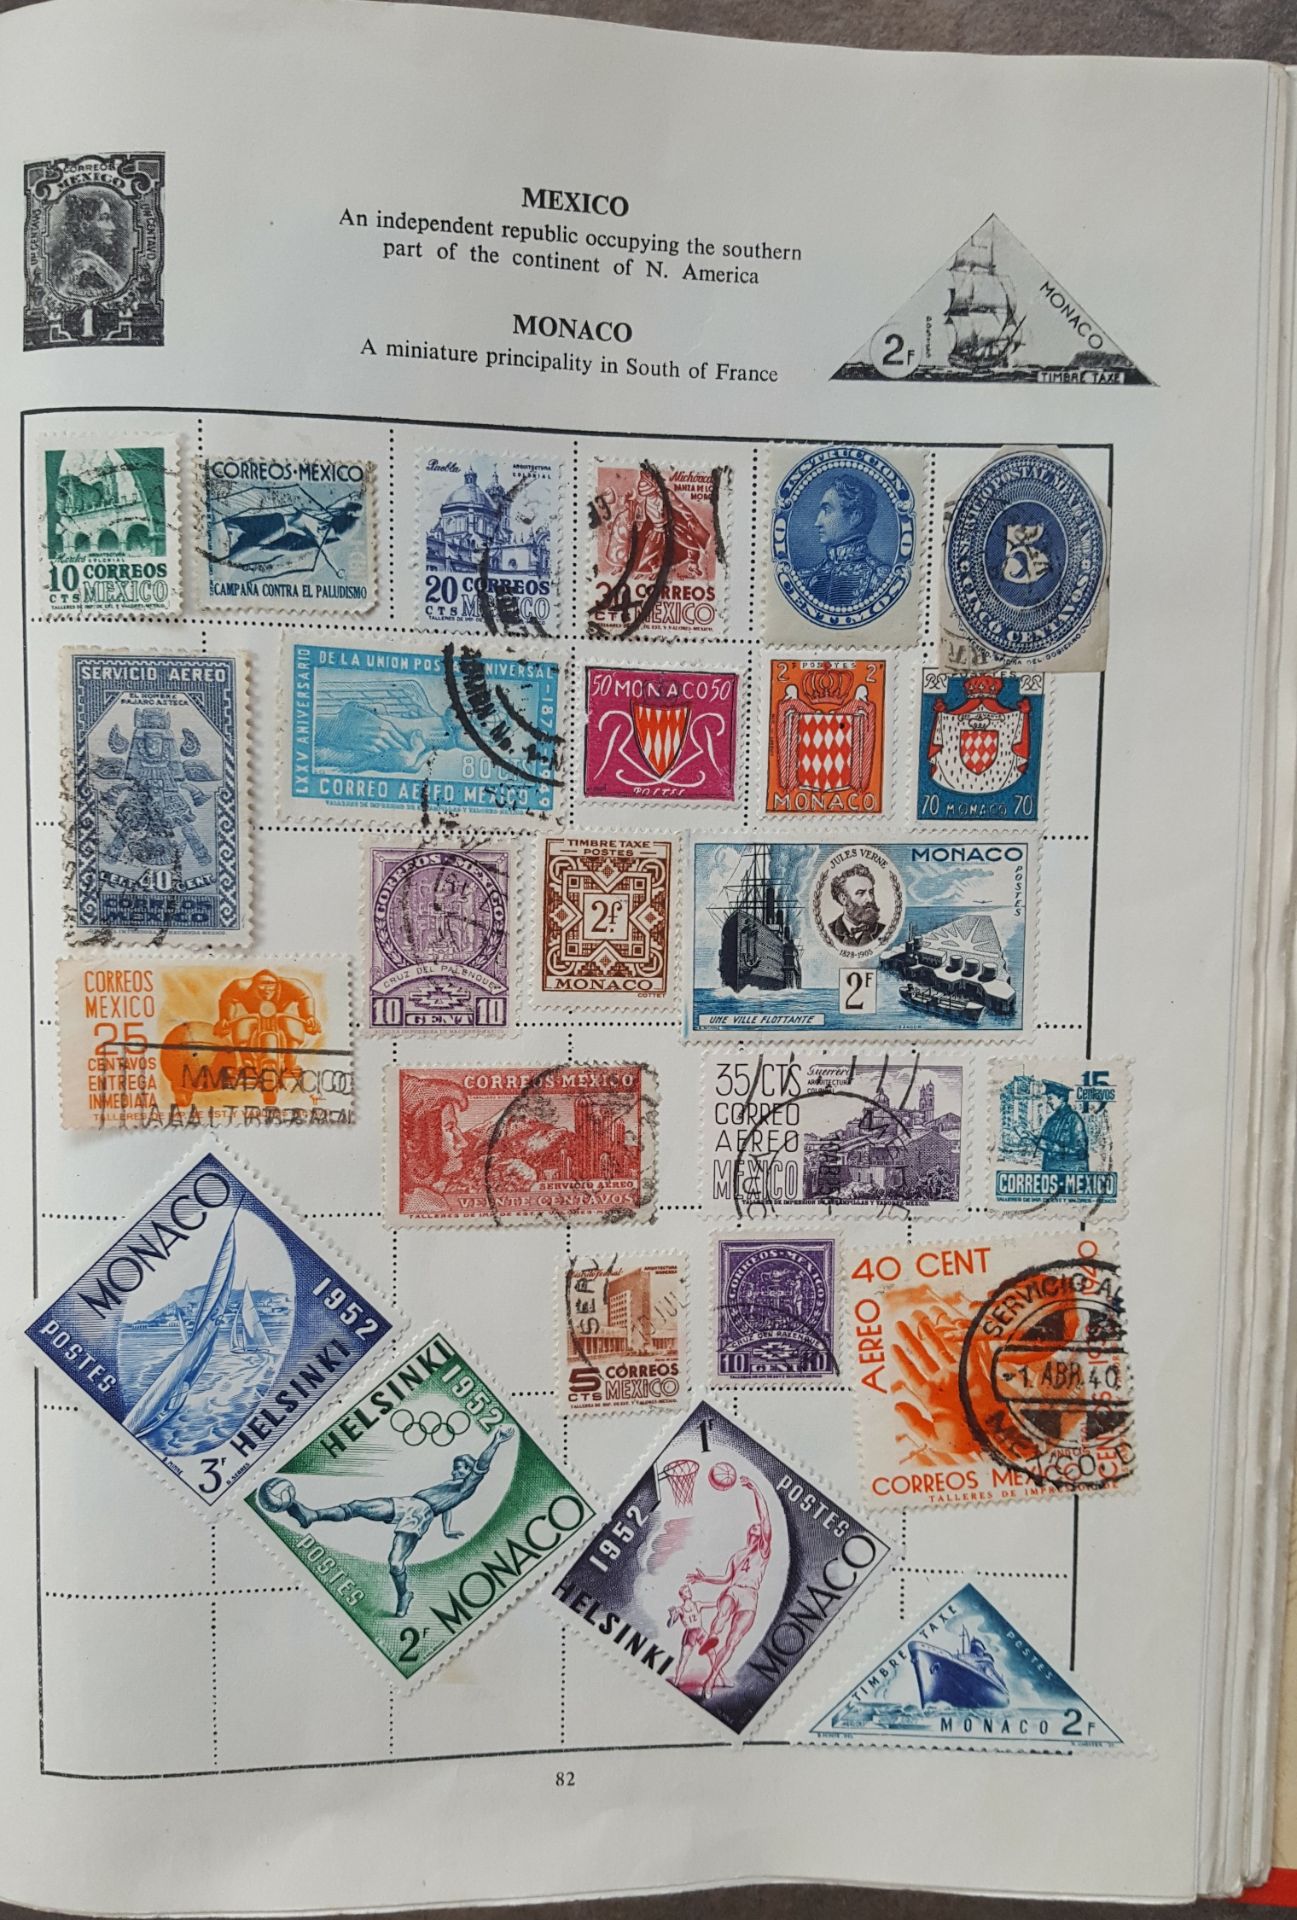 Vintage Retro Liberty Stamp Album Loose Leaf Great Britain Commonwealth & World Stamps - Image 11 of 11